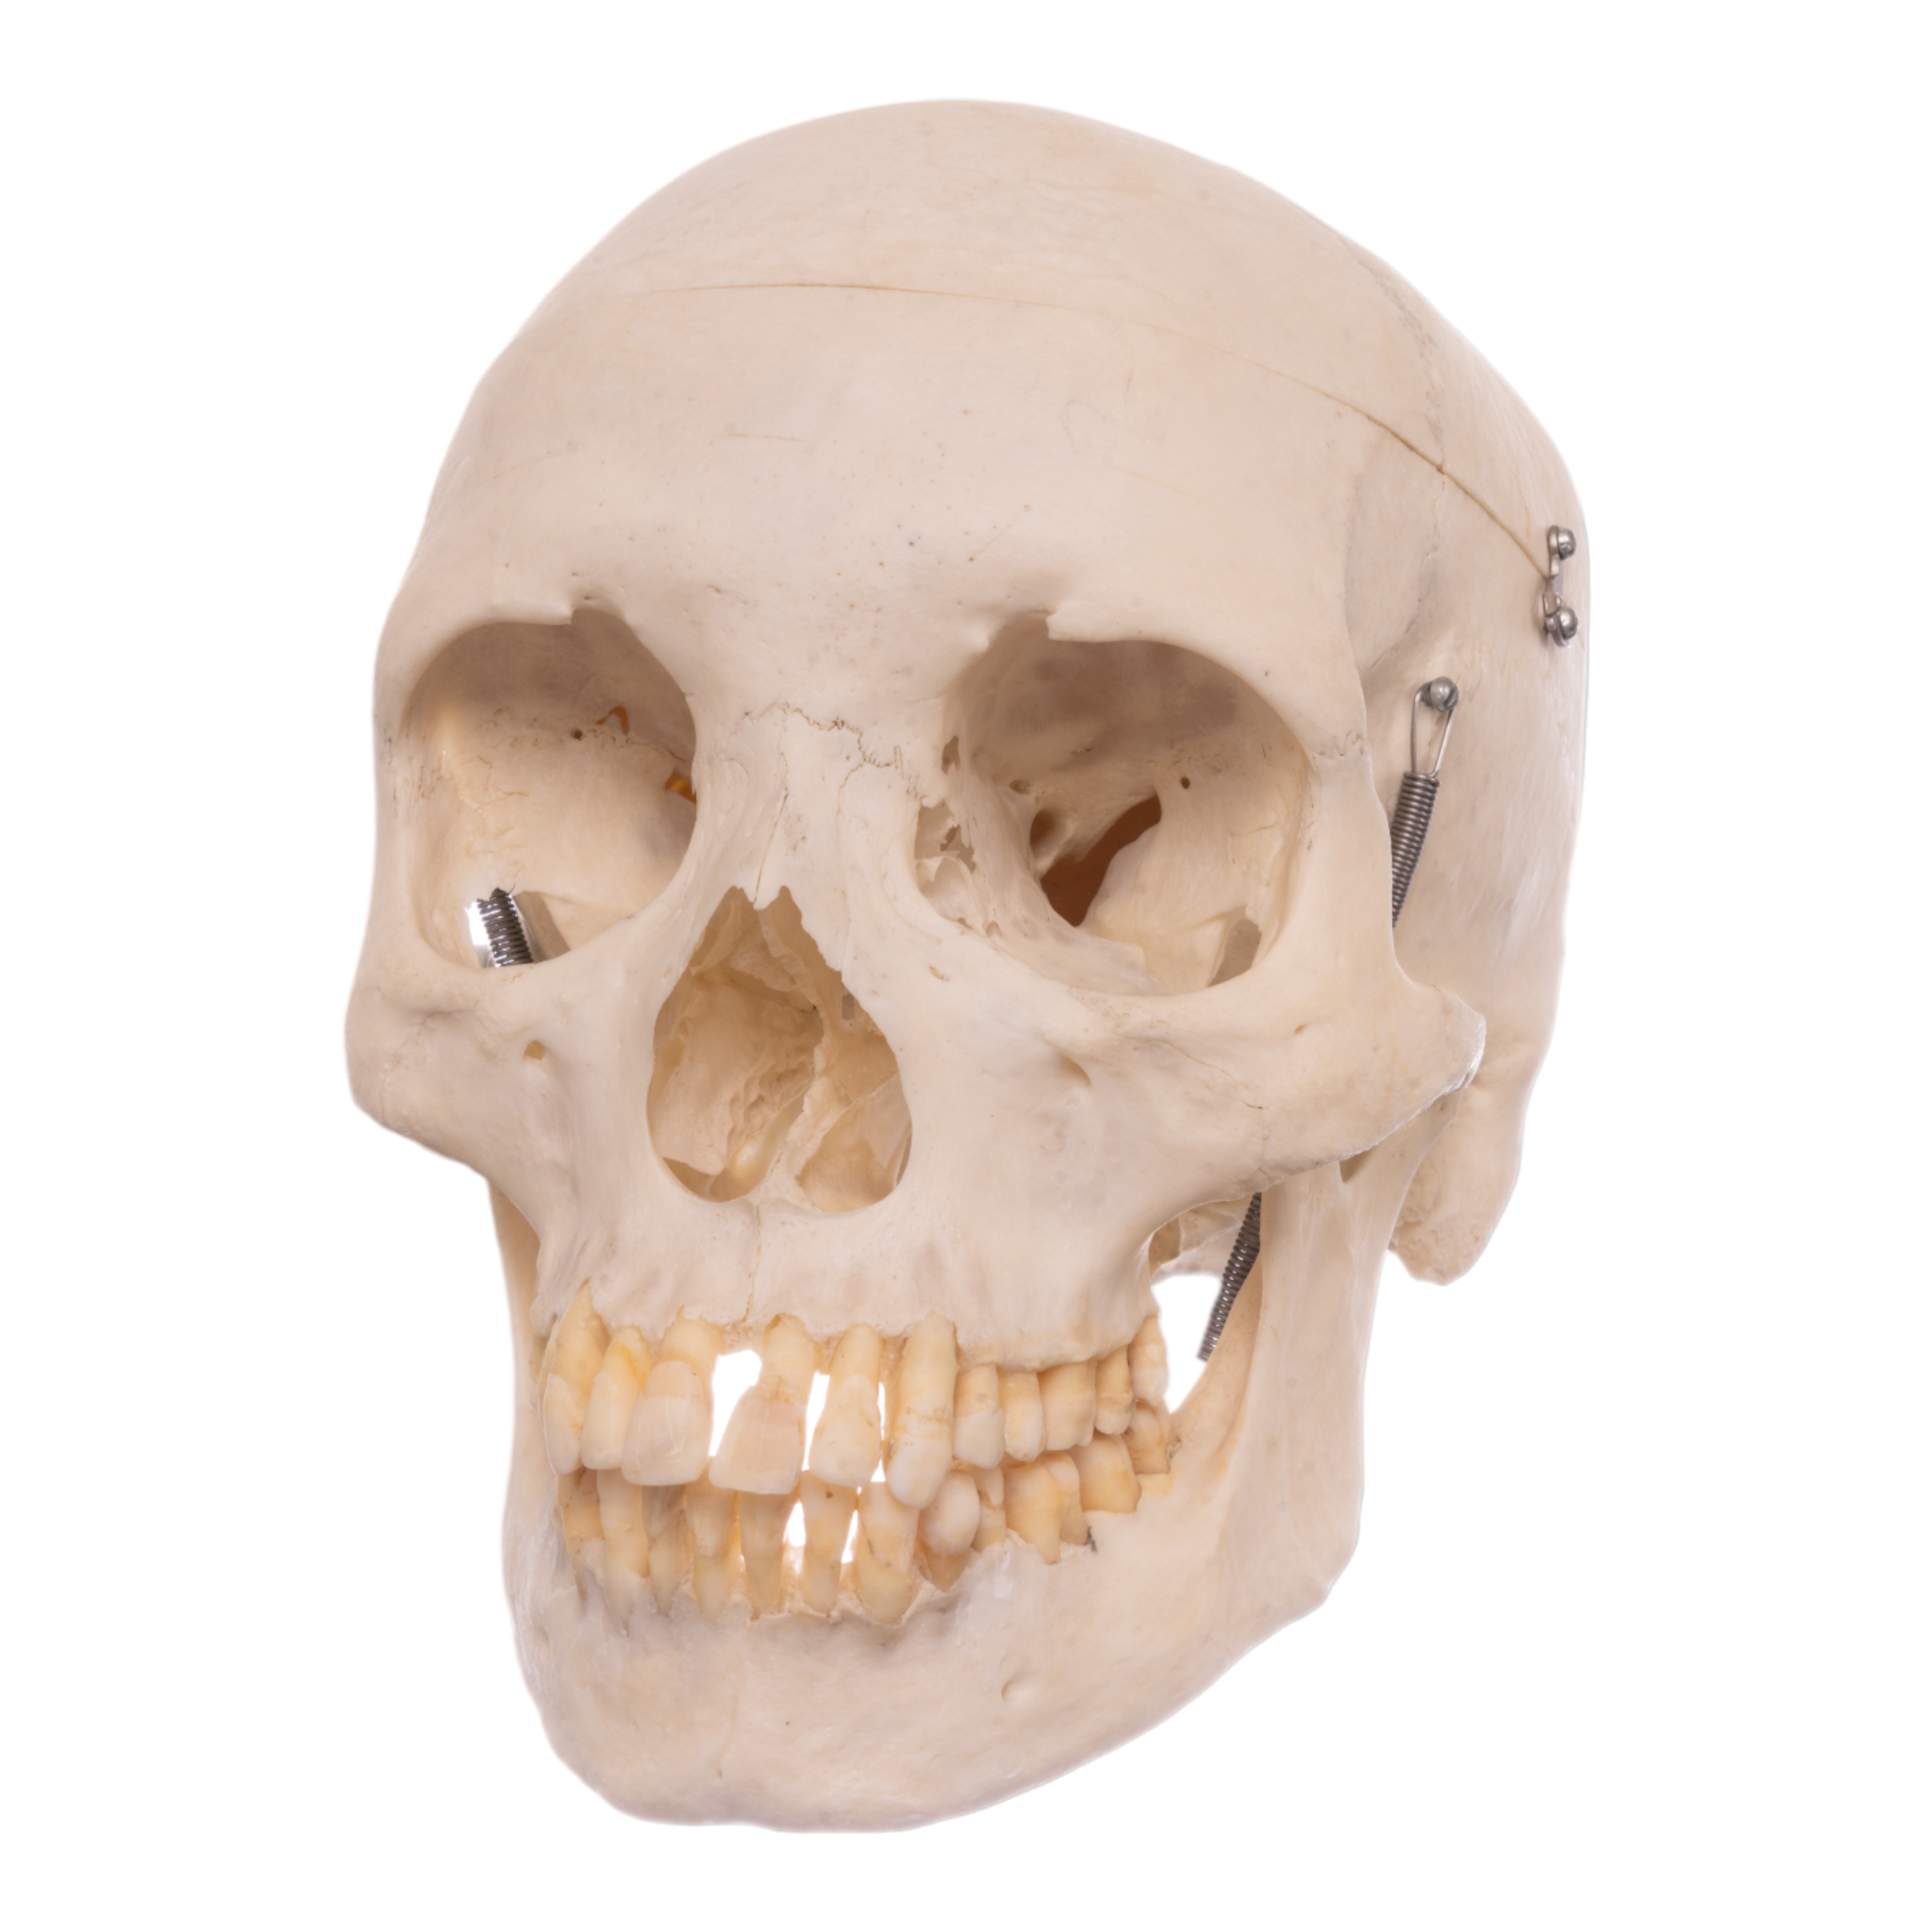 Skulls Unlimited: World Leader in Real and Replica Skulls & Skeletons —  Skulls Unlimited International, Inc.